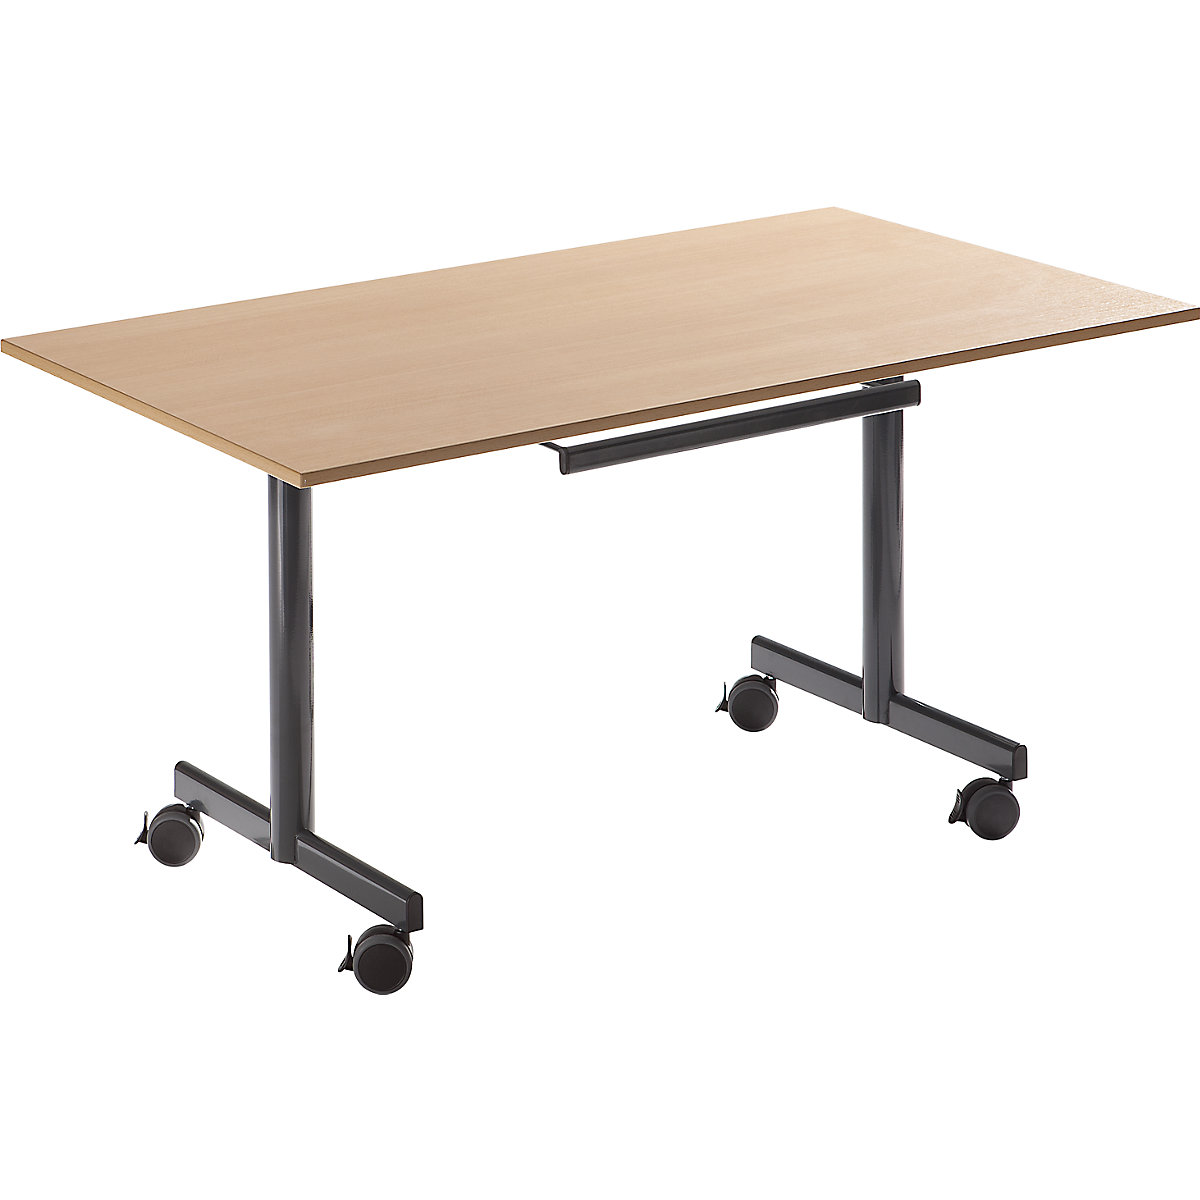 Table with folding top, mobile